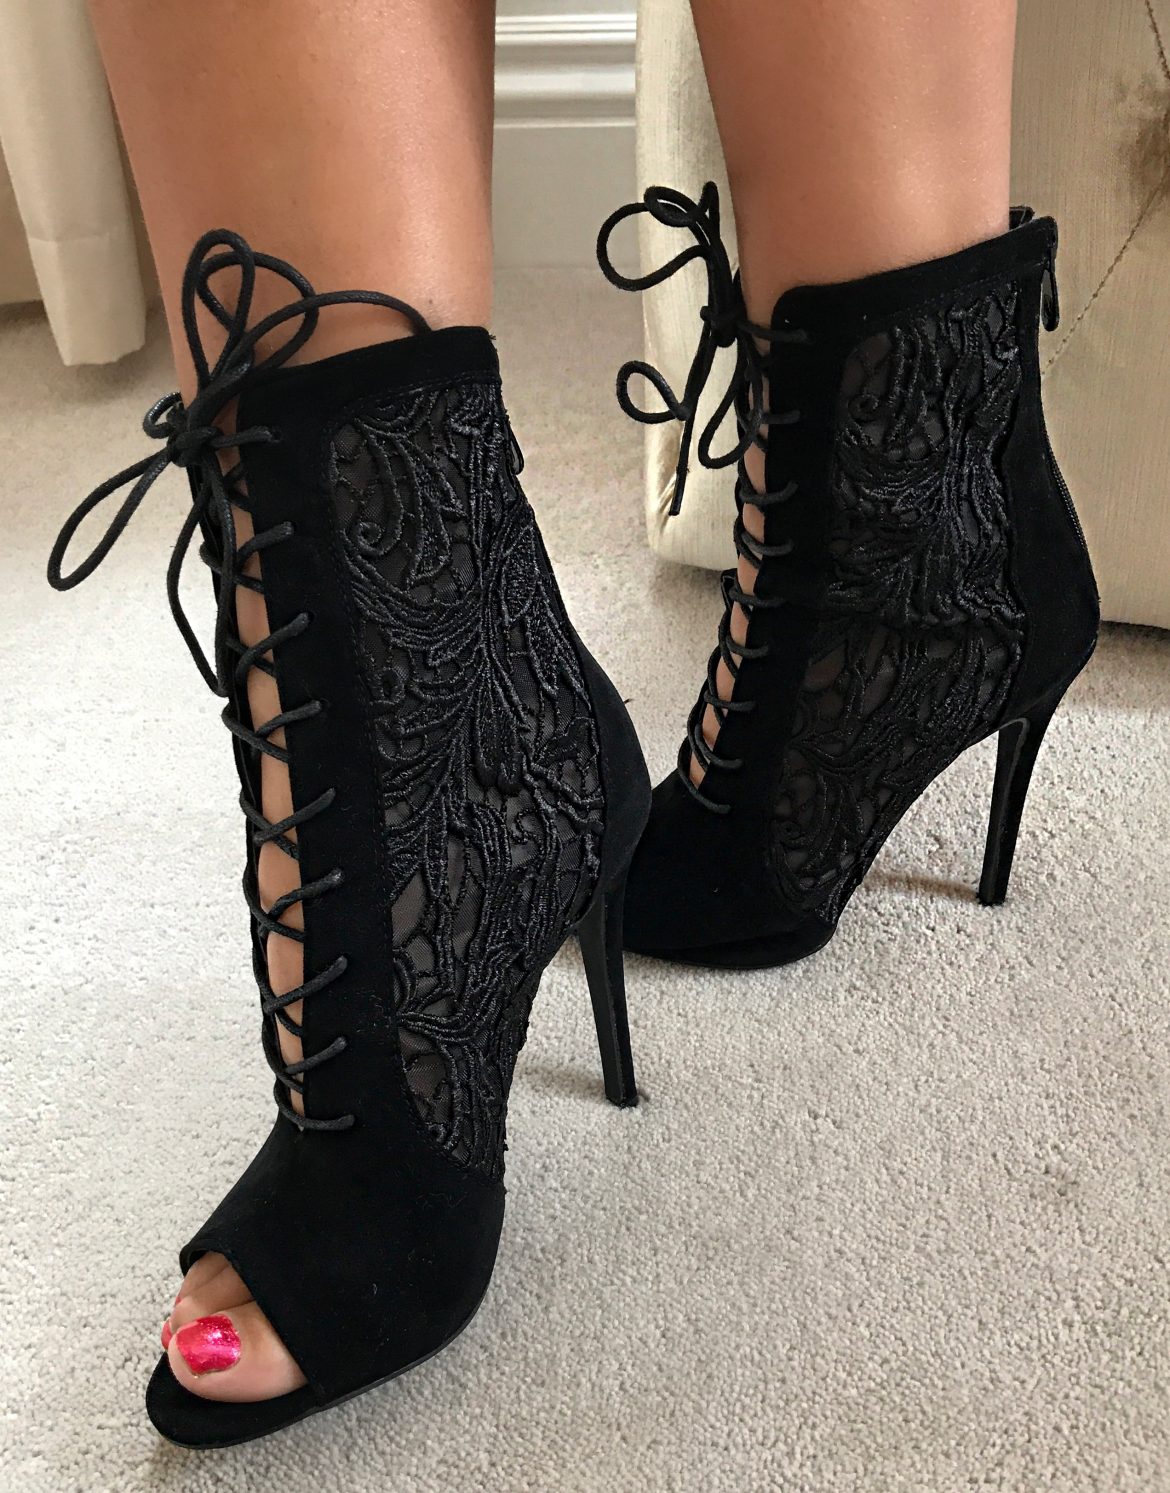 10 MOST WANTED SHOE TRENDS TO KNOW FOR FALL 2017 | ELEGANT DUCHESS BLOG